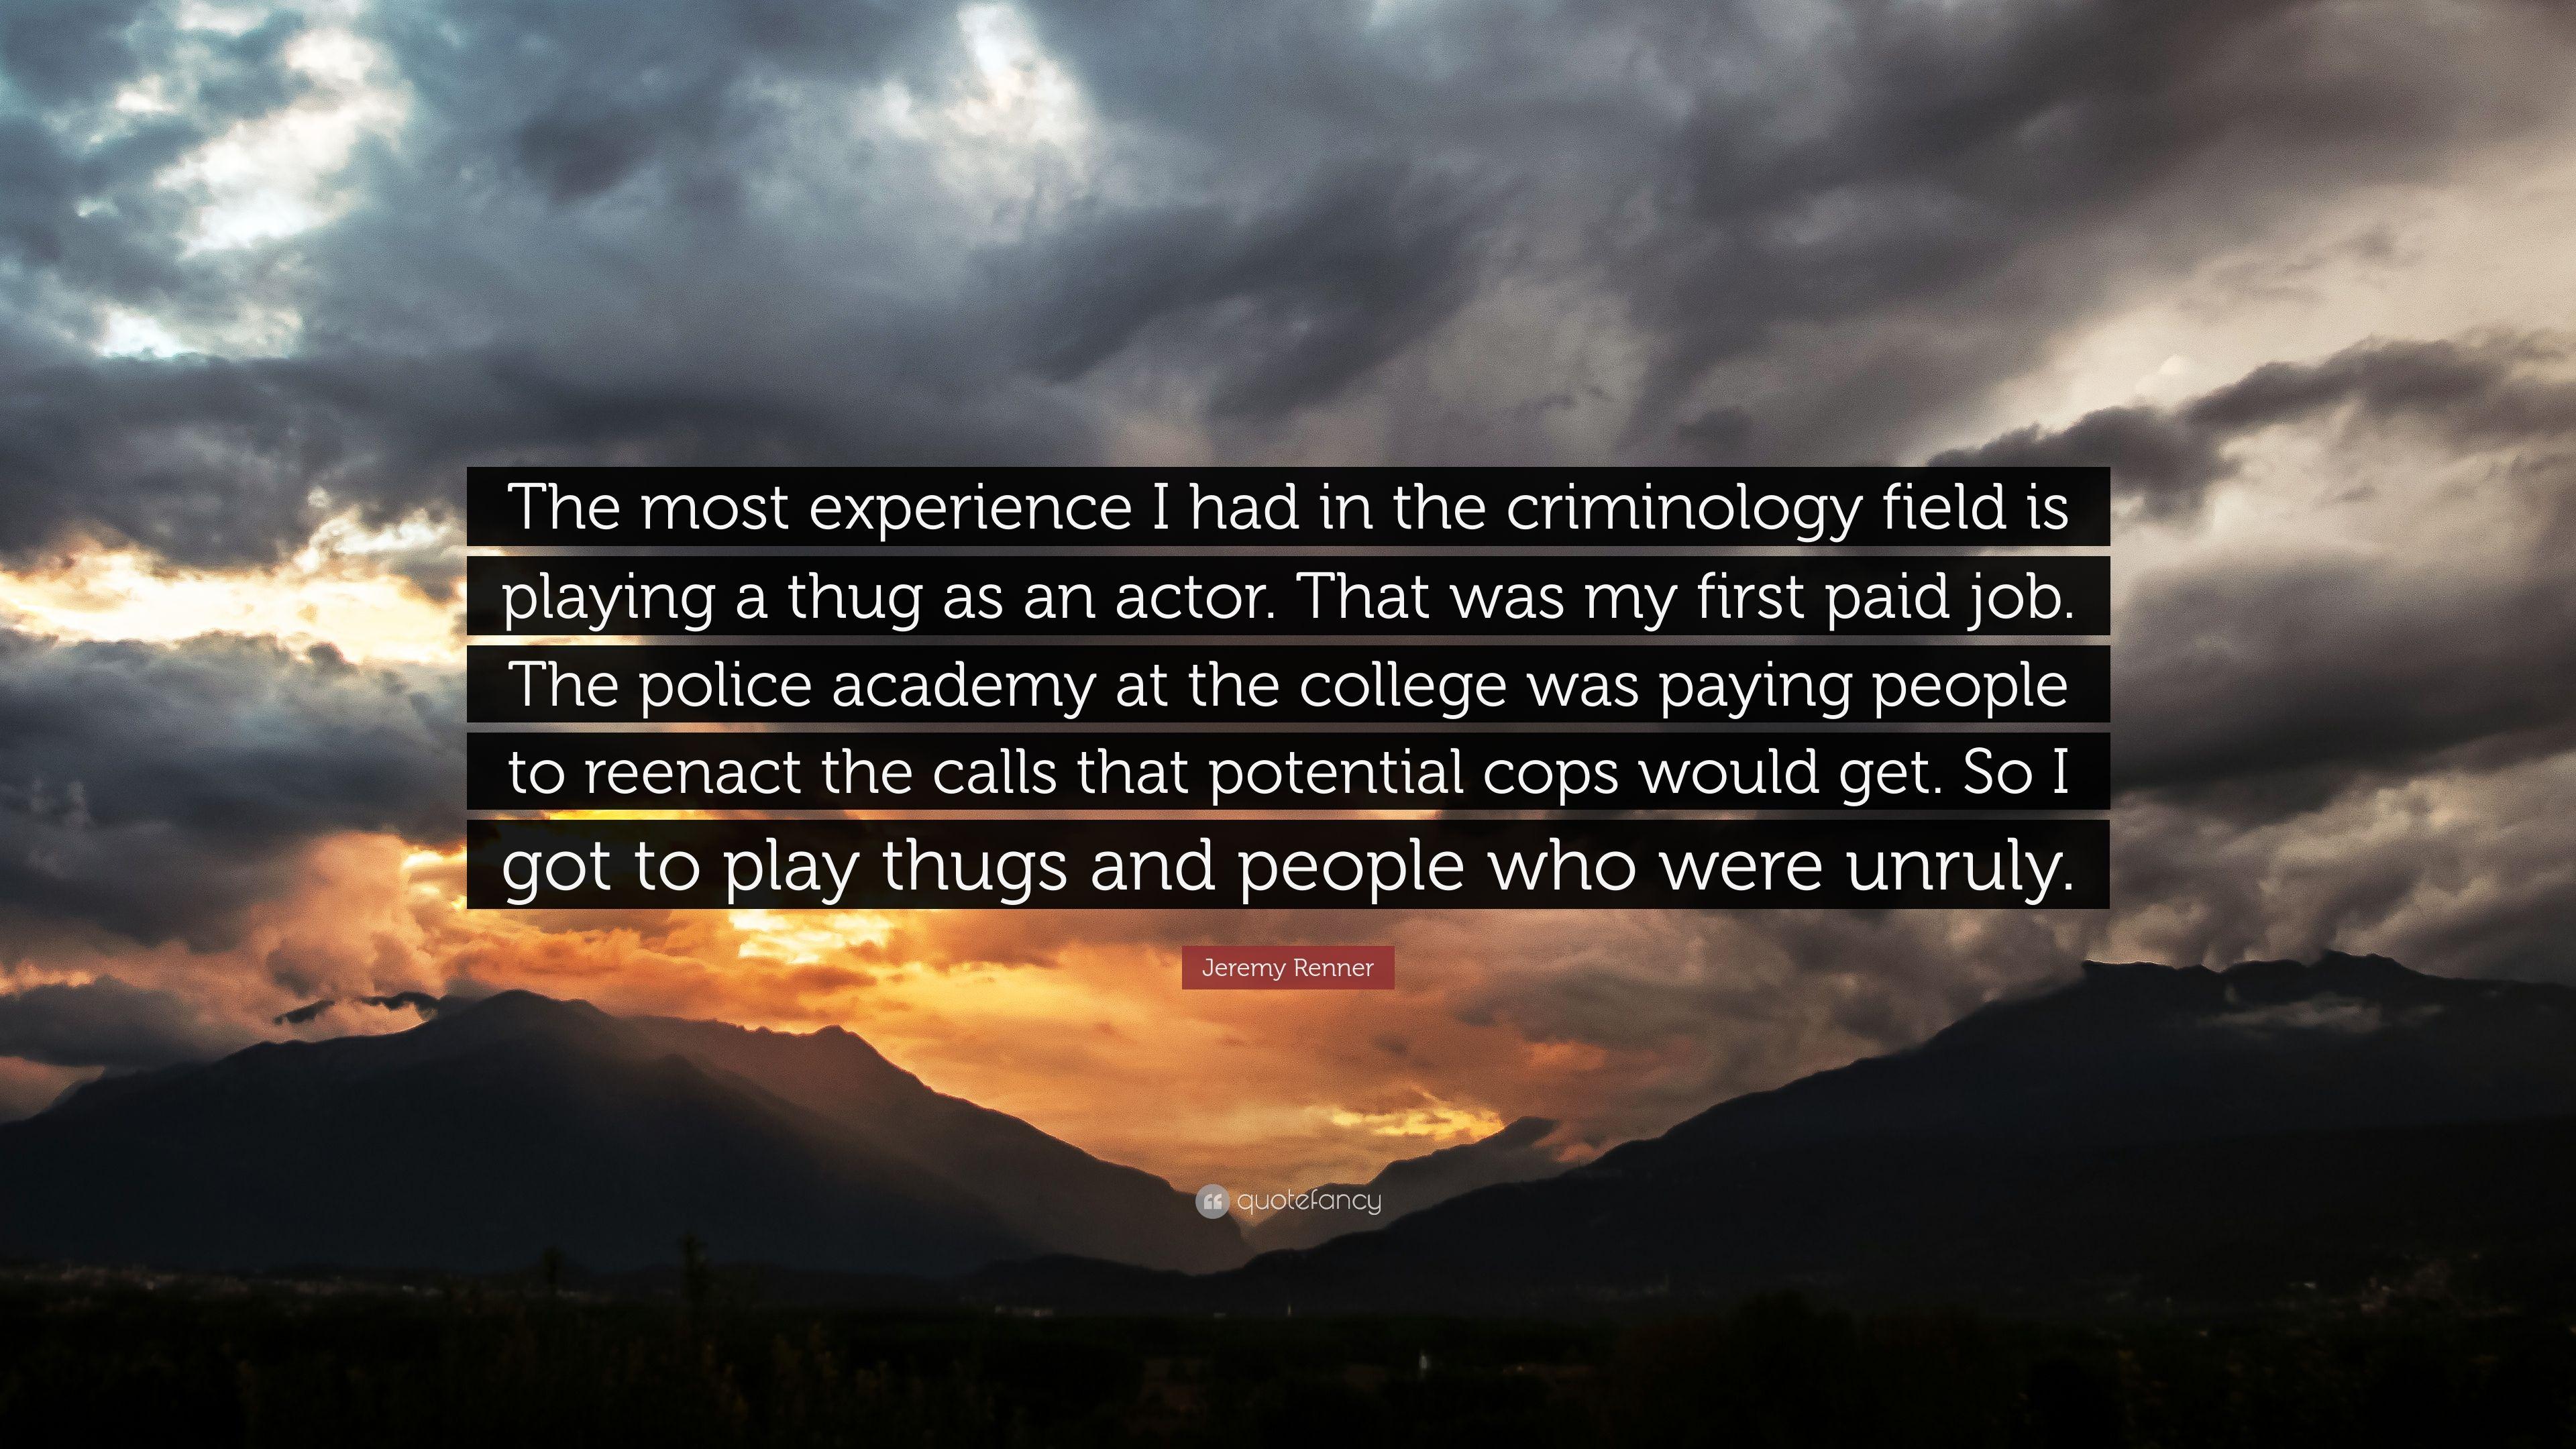 Jeremy Renner Quote: “The most experience I had in the criminology